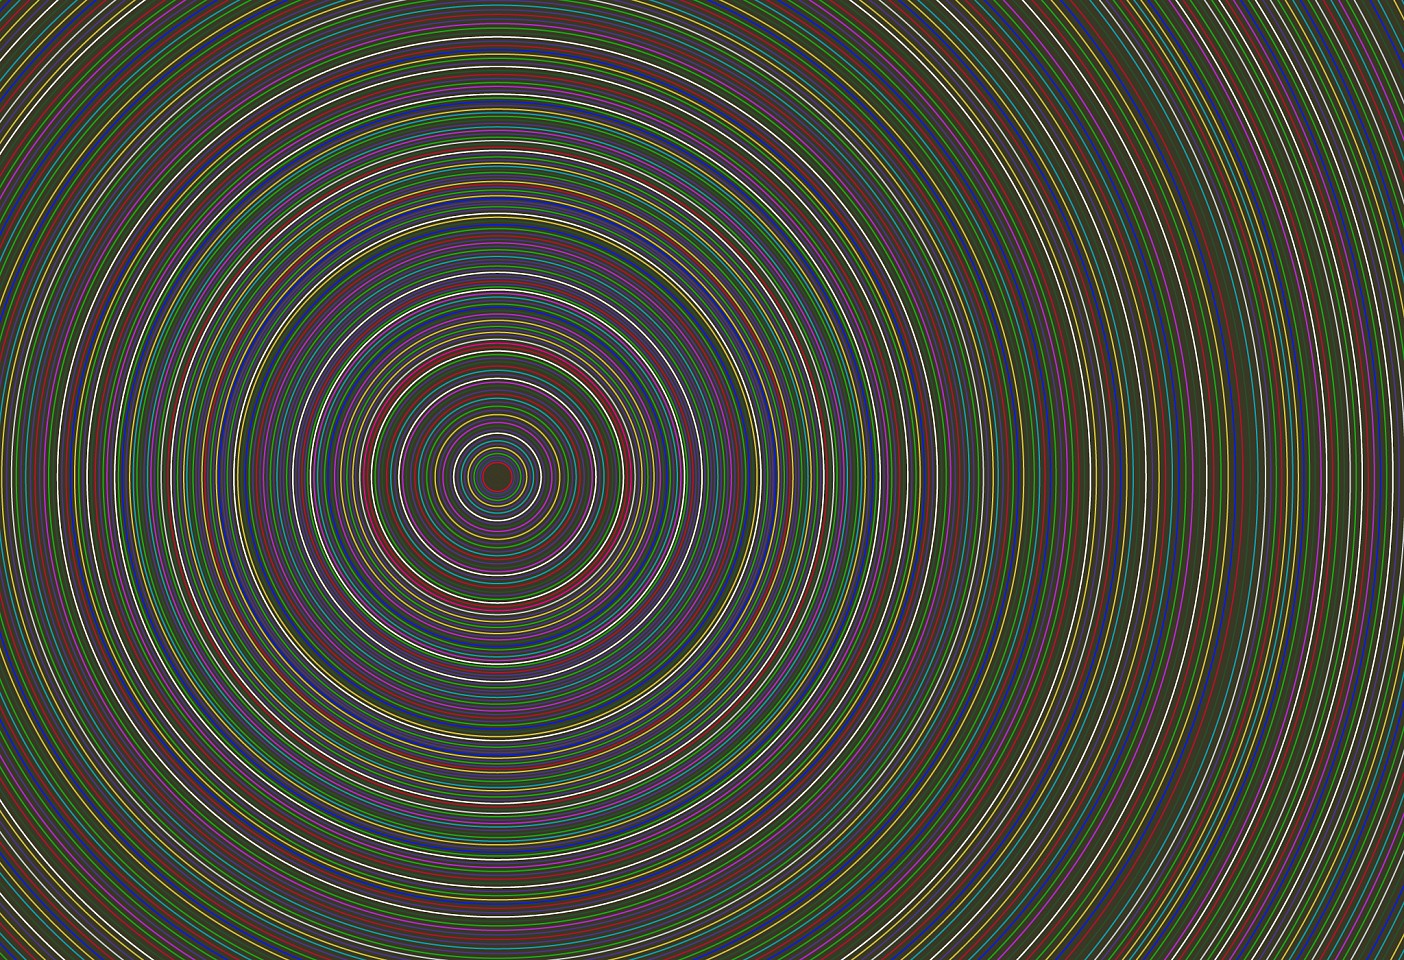 Dane Albert, Circles #40 Multi-Color Night, 2023
Acrylic on canvas (Concept), 48 x 72 in. (121.9 x 182.9 cm)
Series of colored lines and shapes in multiple configurations
DA.2023-040-multicolor-night